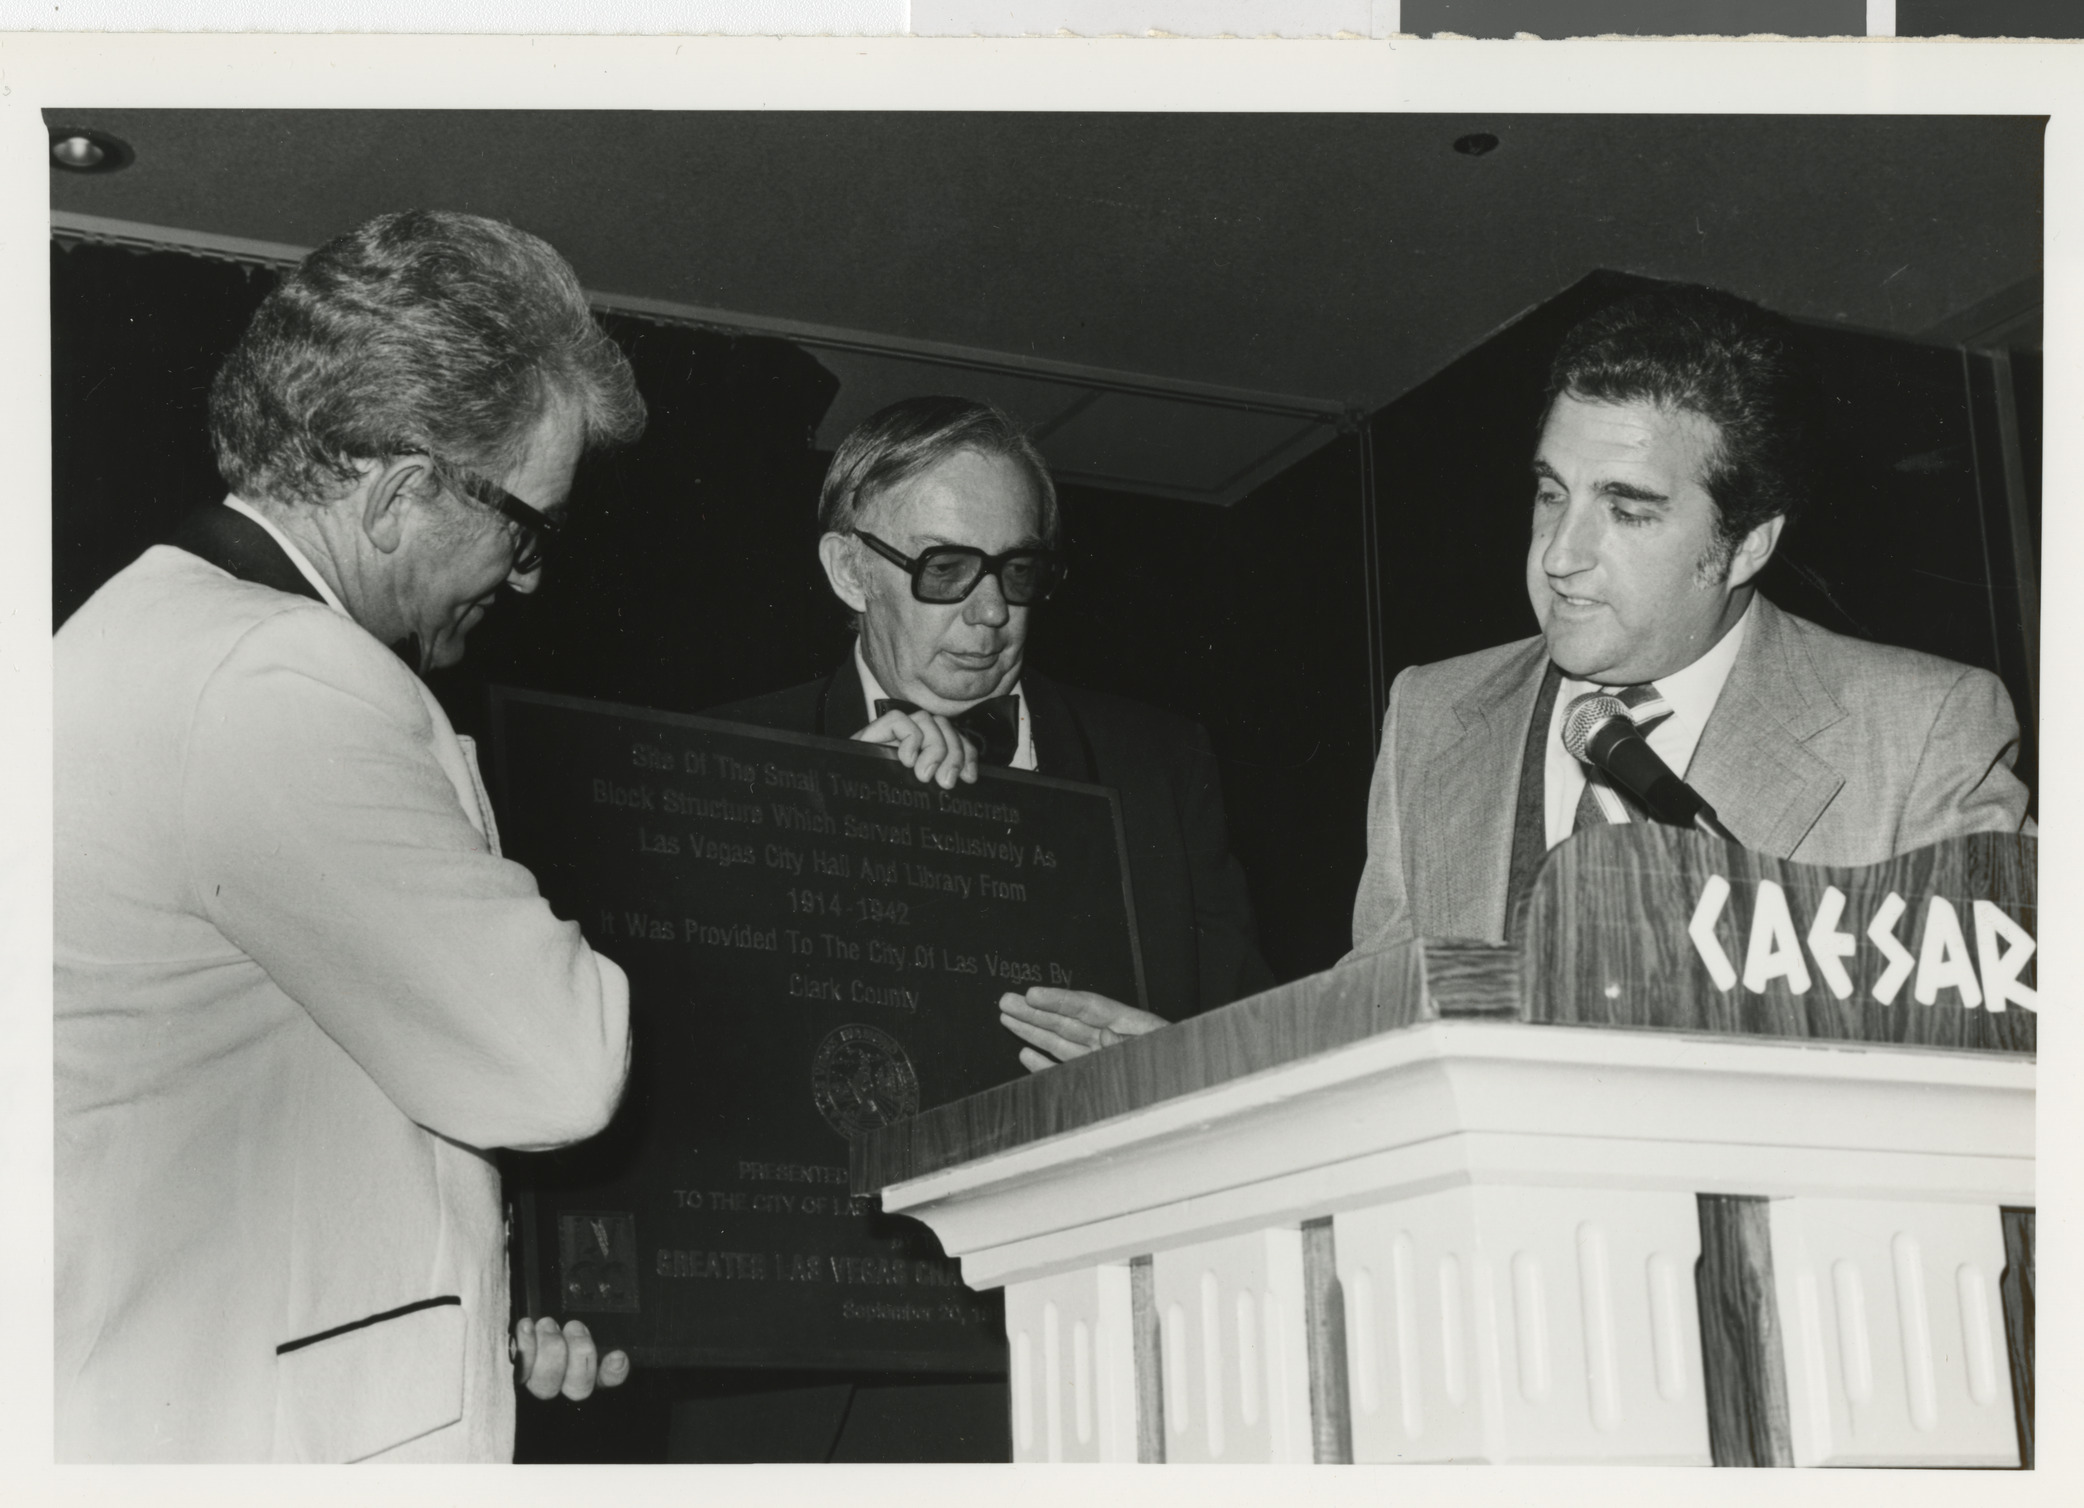 Photograph of Ron Lurie, City Commissioner, with plaque for the City Hall and Library building, circa 1978